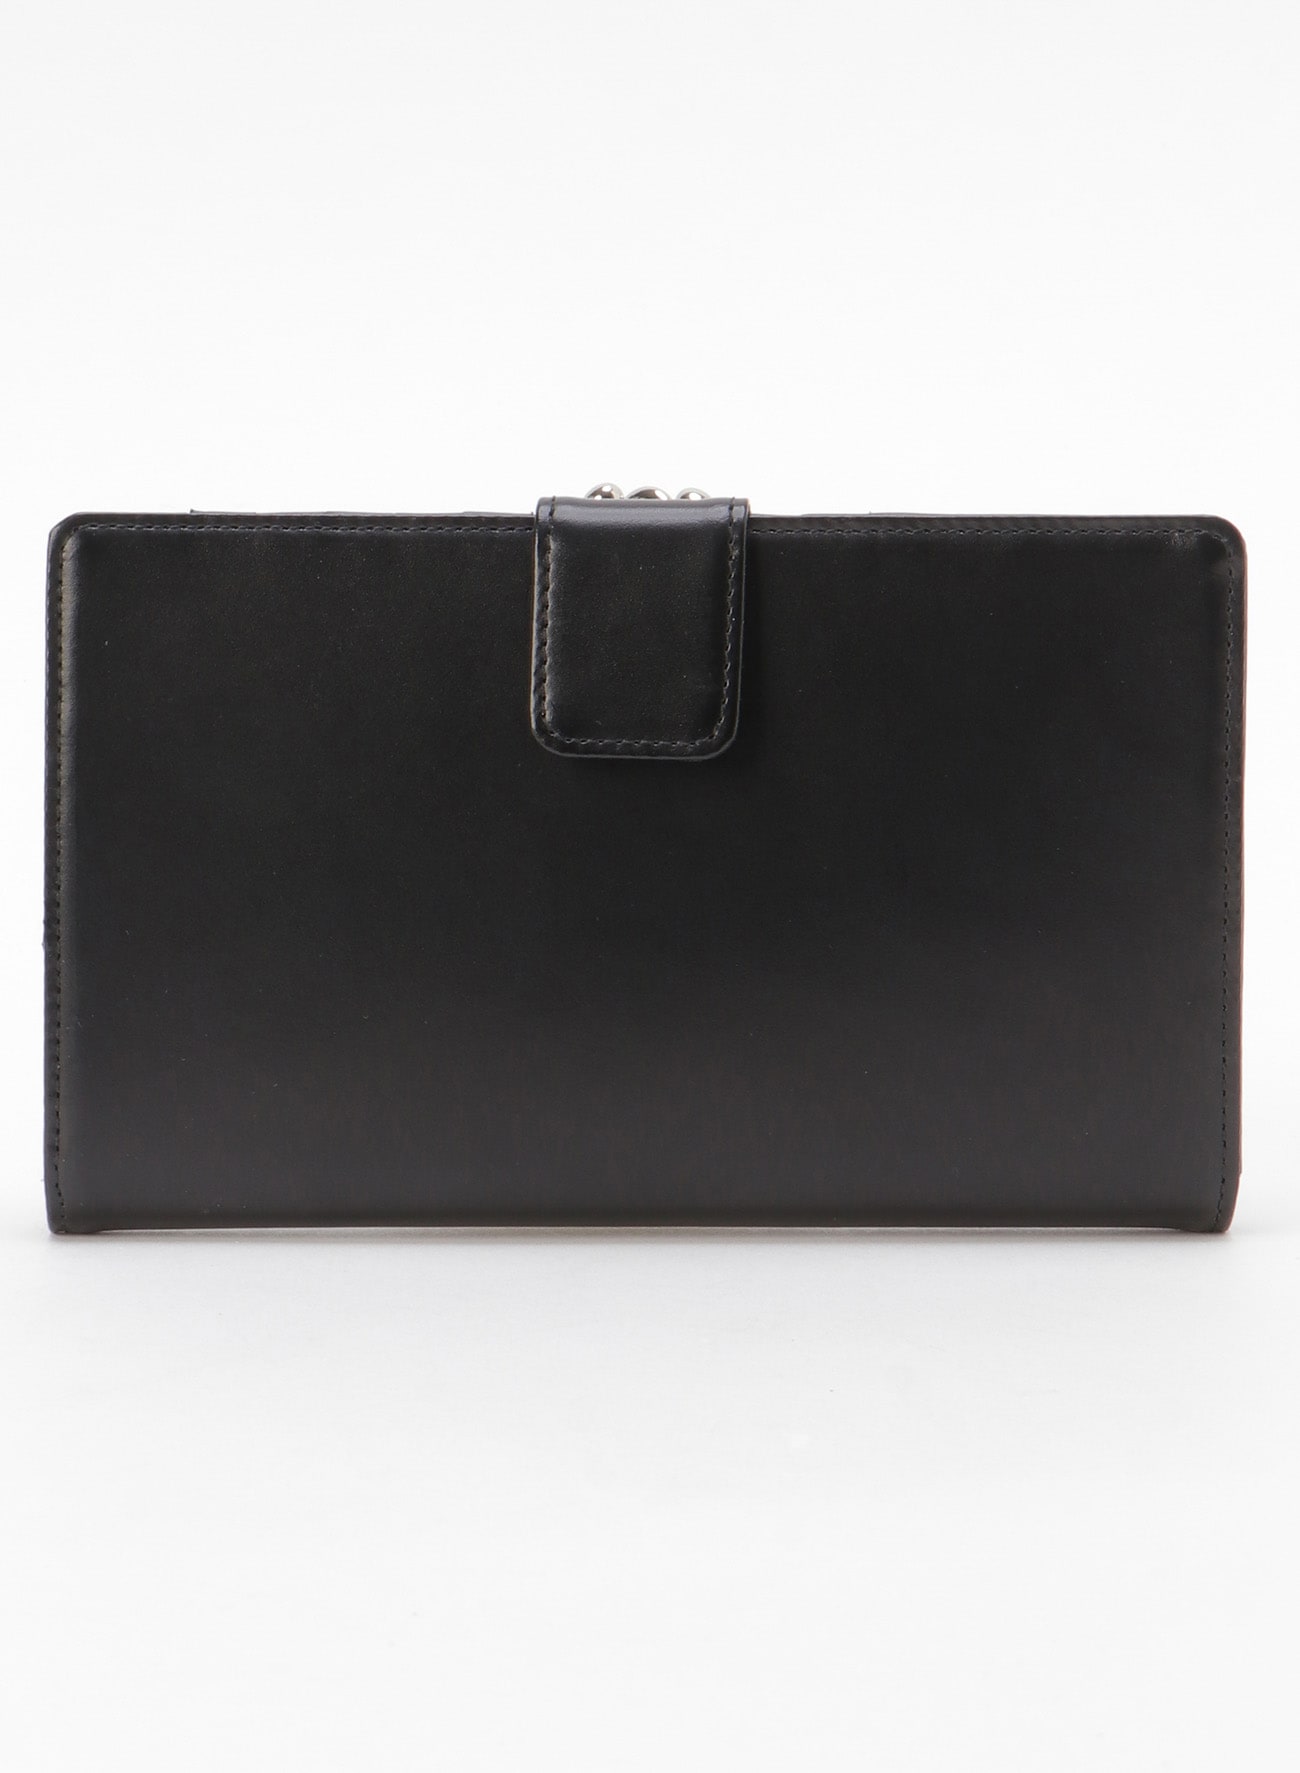 HIGH-GLOSS LEATHER LONG CLASP PURSE(FREE SIZE Black): Y's｜THE